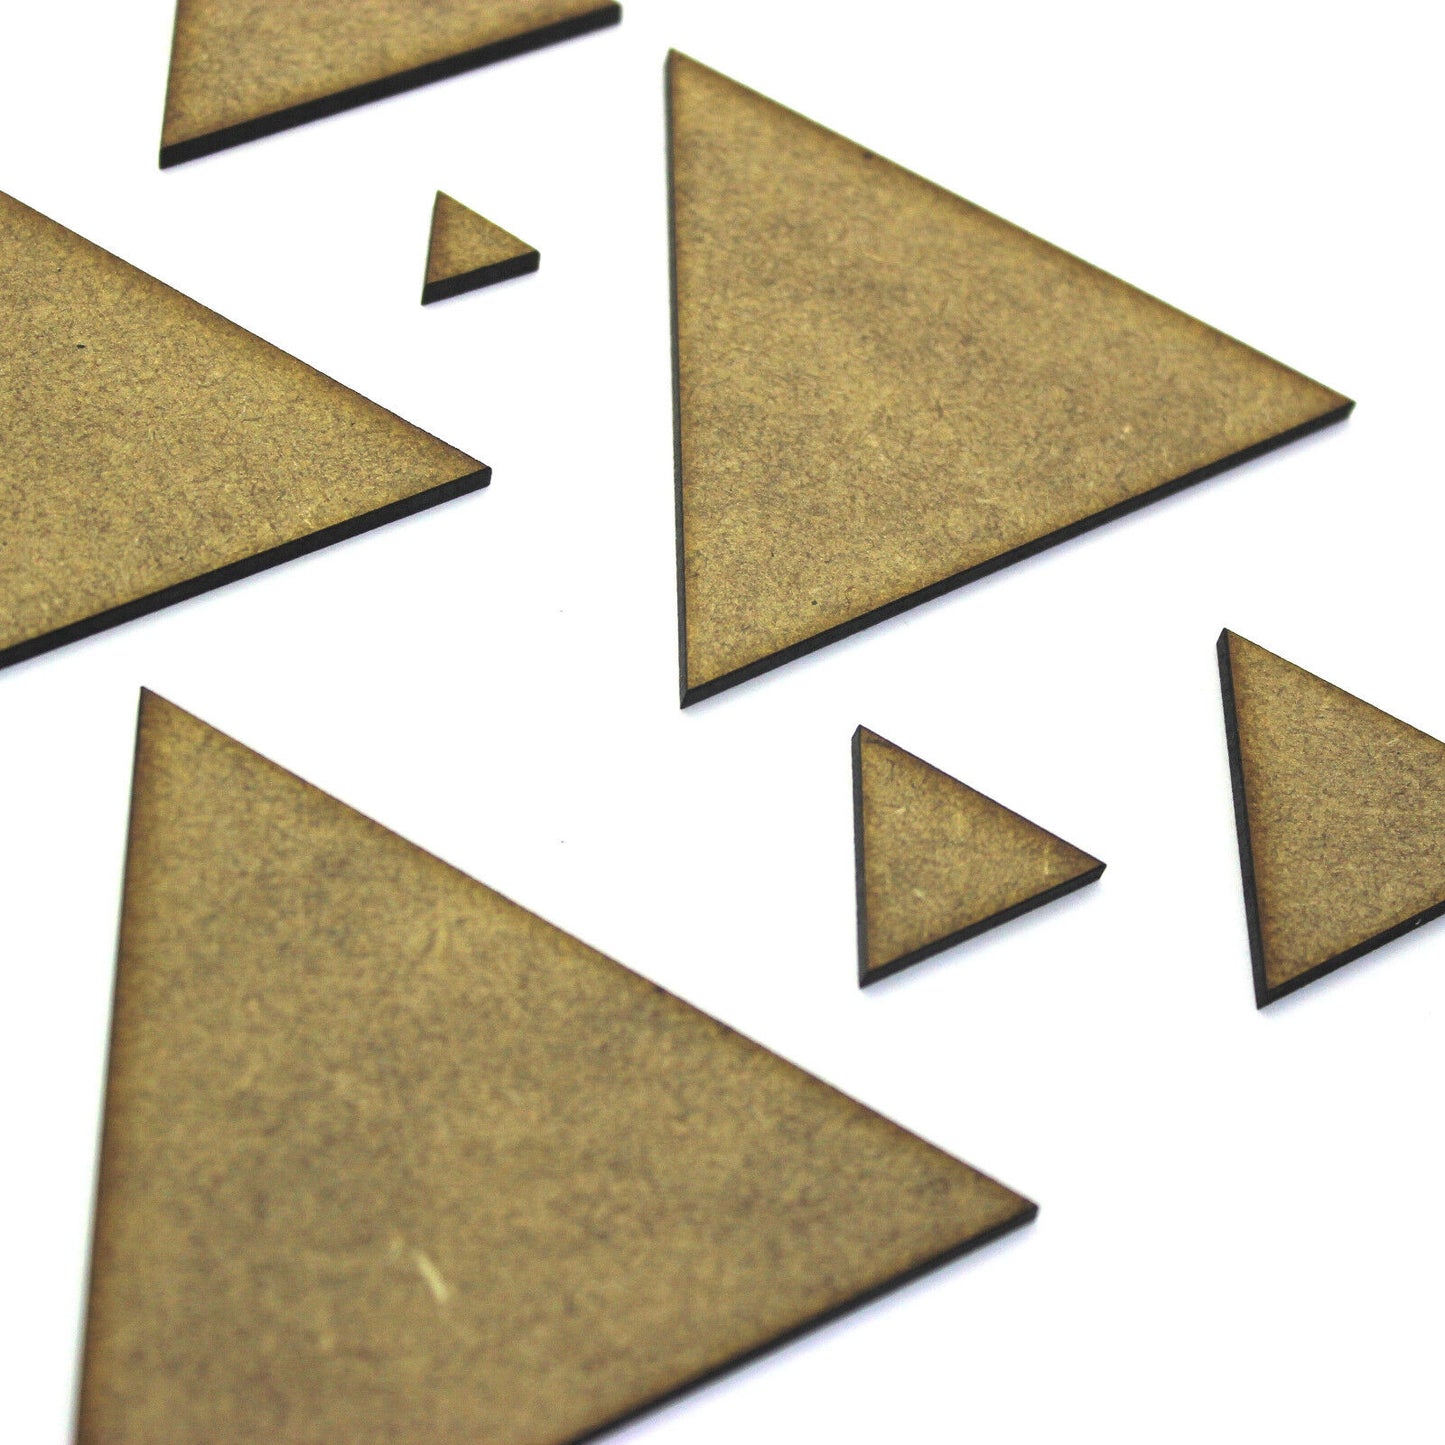 Triangle Craft Shape Blank, Various Sizes, 2mm MDF Wood. Schools, Education